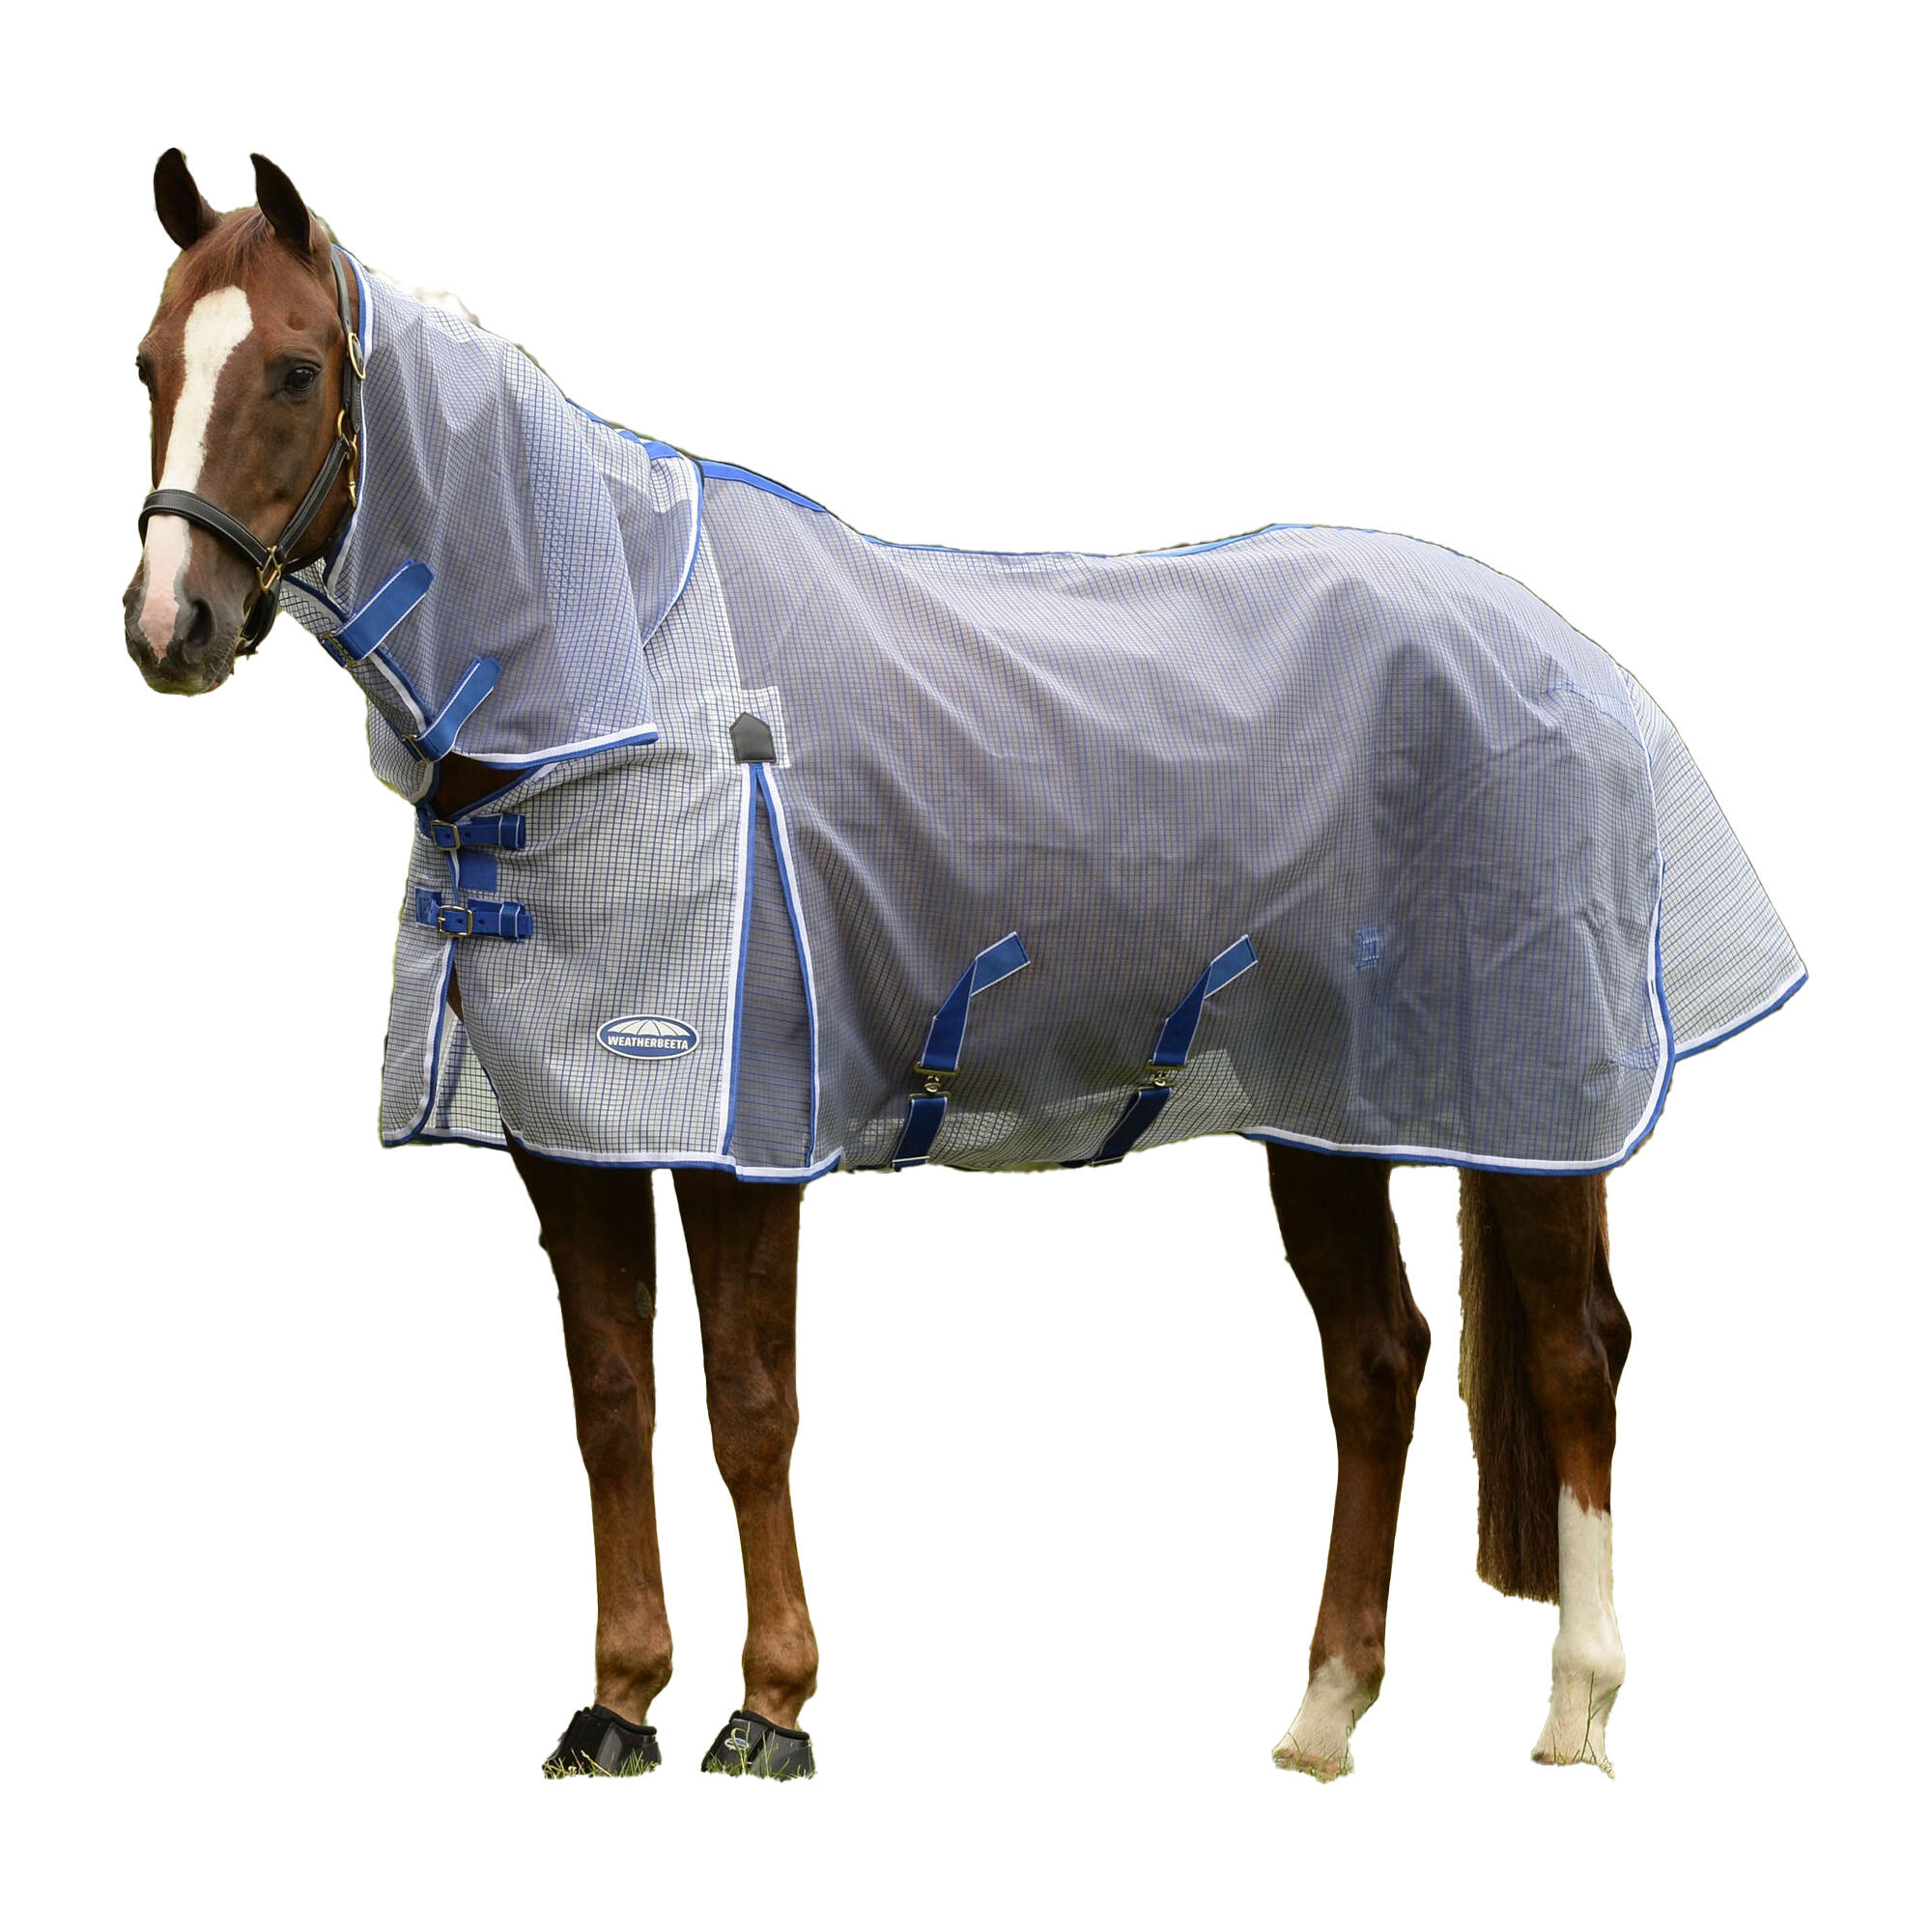 Comfitec Ripshield Plus Combo Neck Ultra Belly Wrap Horse Turnout Rug 4/4